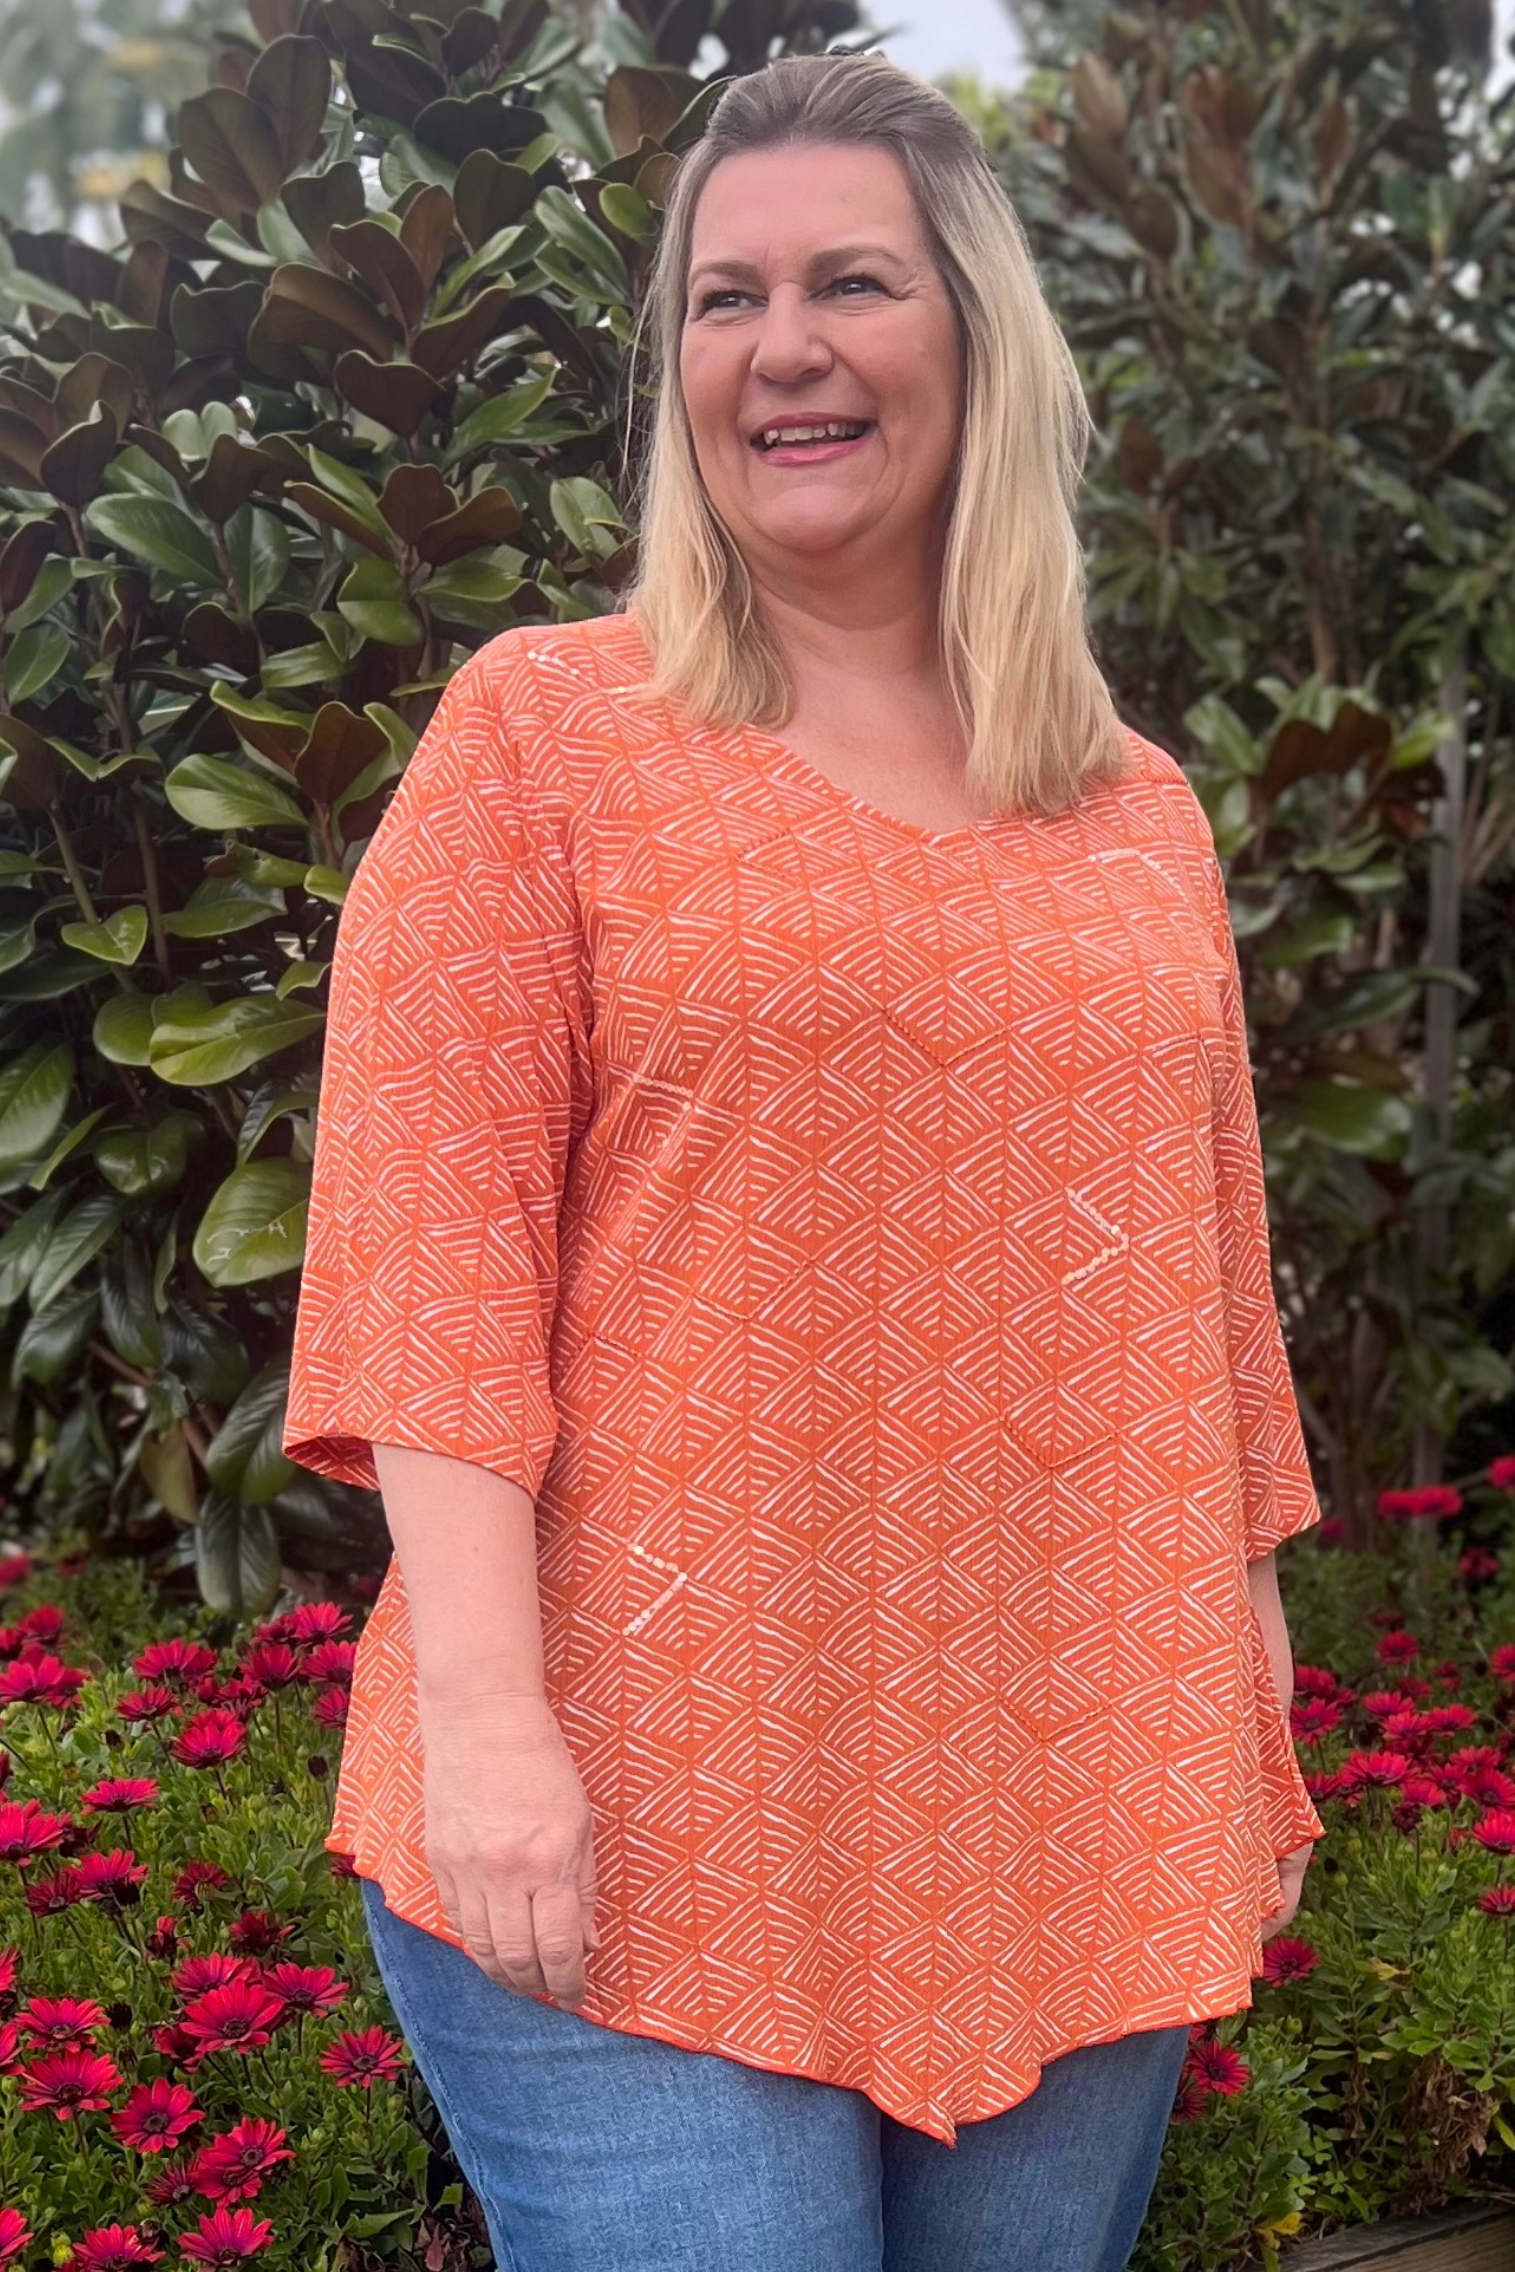 Kita Ku modelling an orange abstract printed top with some sequins embellishments in a garden setting. 